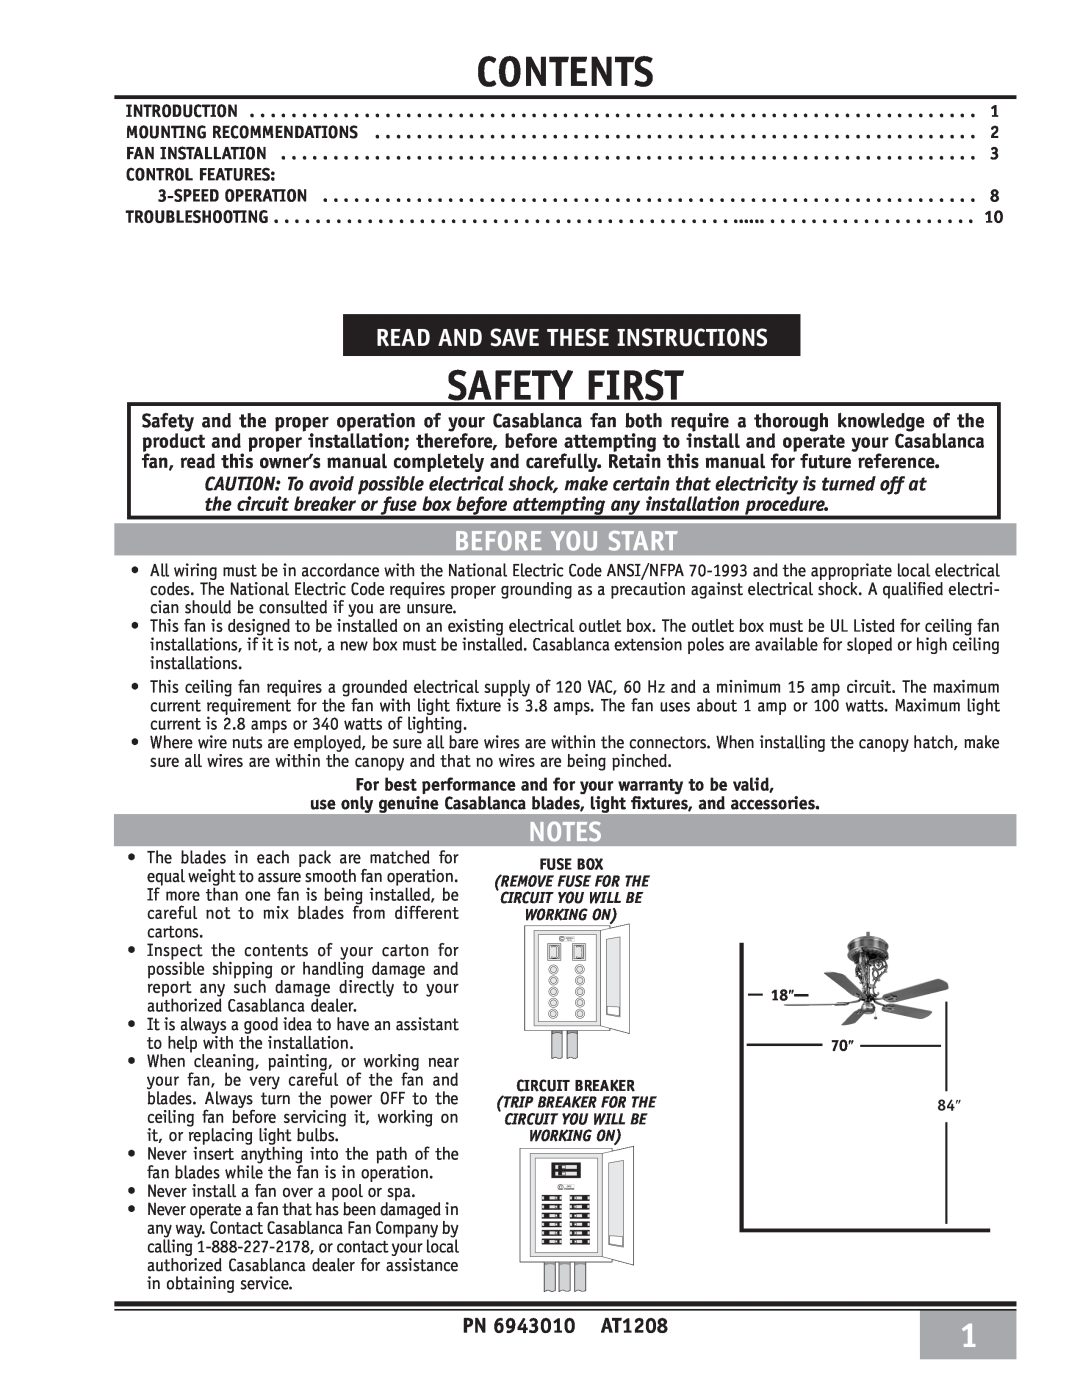 Casablanca Fan Company 69xxD warranty Before You Start, Read And Save These Instructions, PN 6943010 AT1208, Safety First 